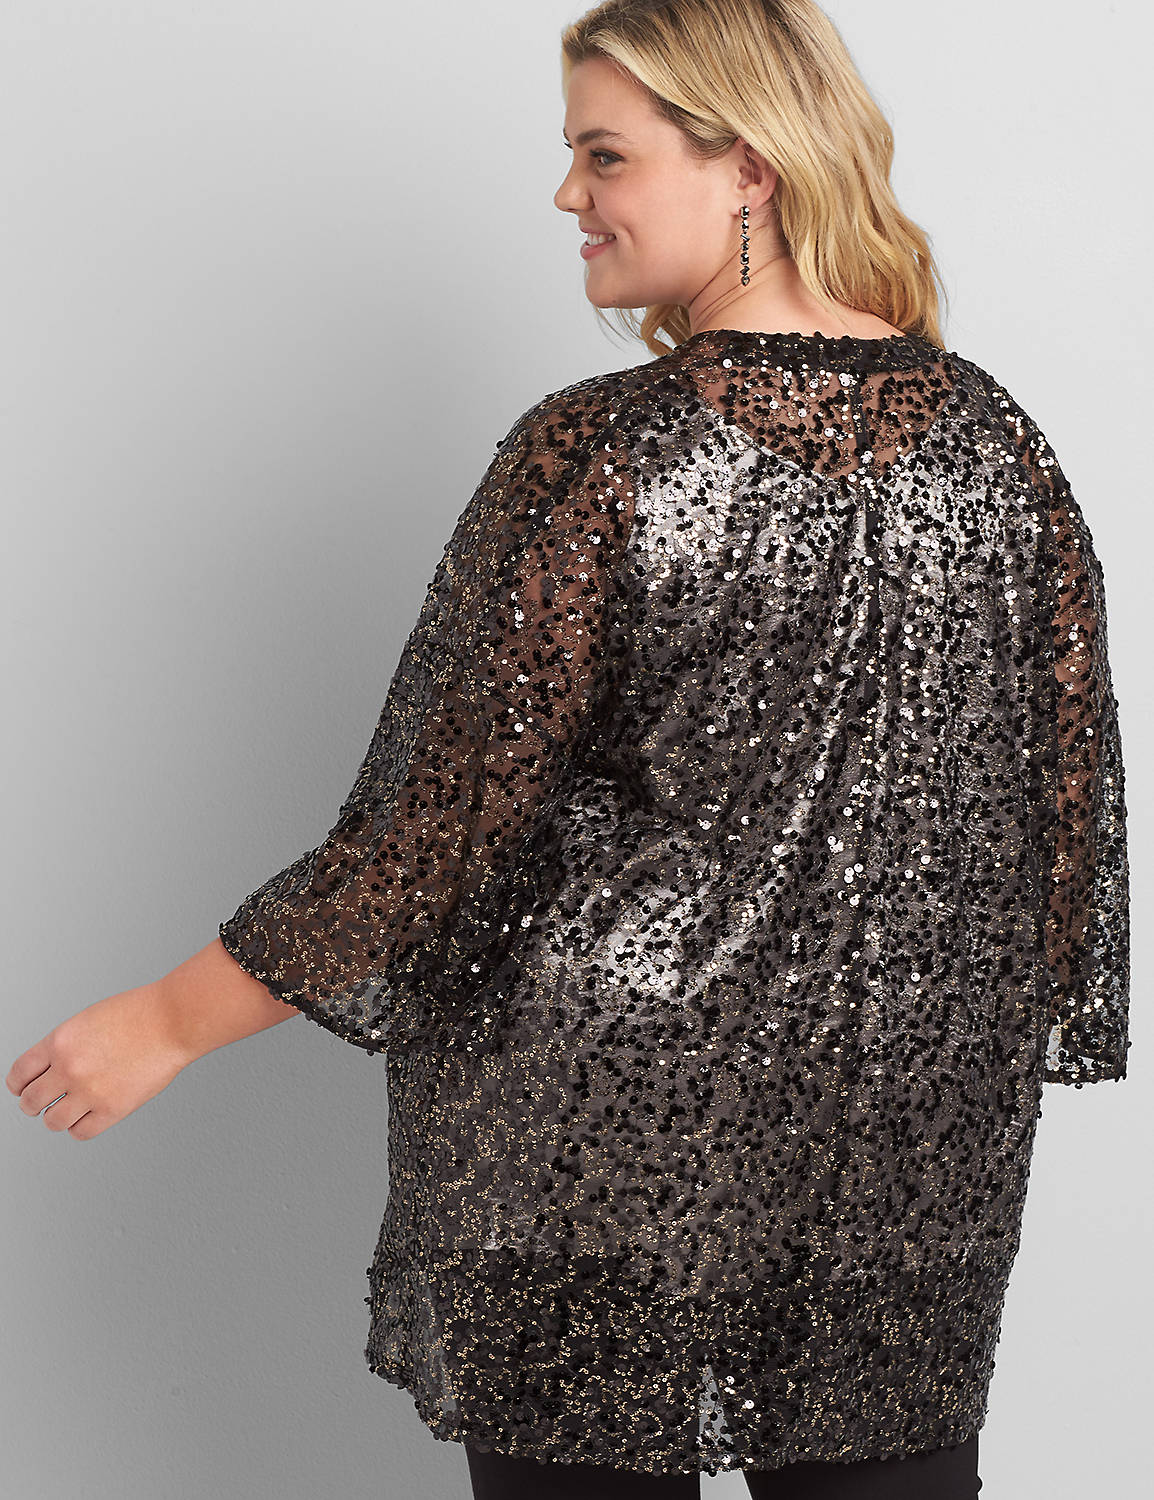 Outlet 3/4 Sleeve Sequin Kimono Scattered Sequin Over Piece 1117396:Black Ground W/Gold/Black Sequins- As Hanger:18/20 Product Image 2